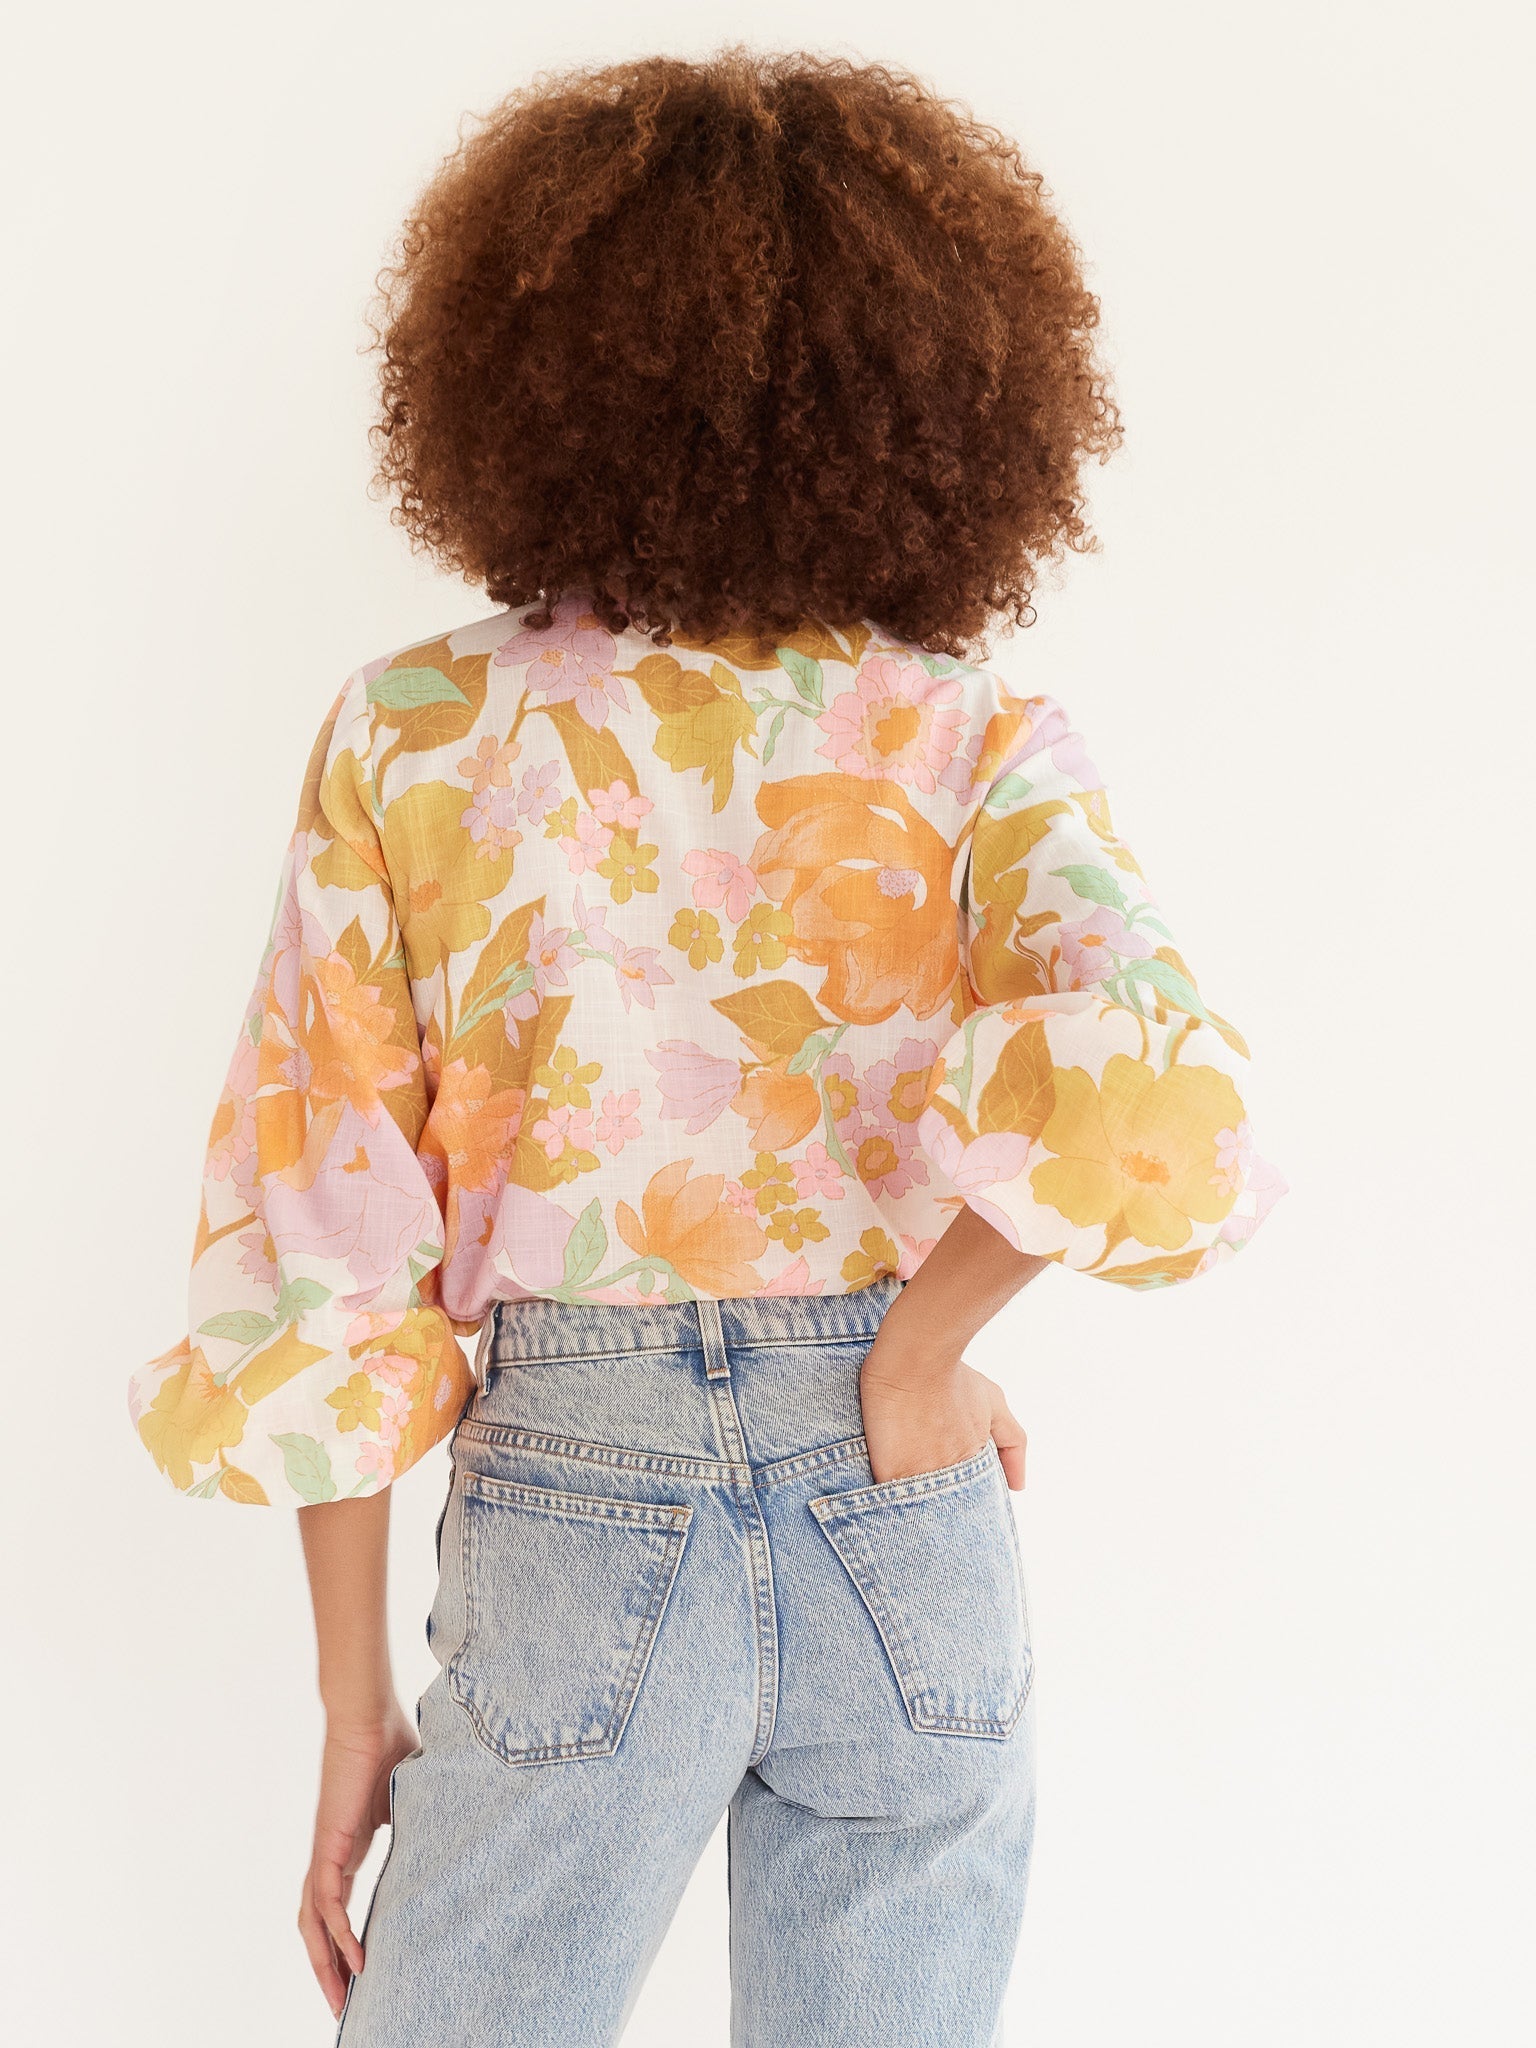 MILLE Clothing Blair Top in Harmony Floral